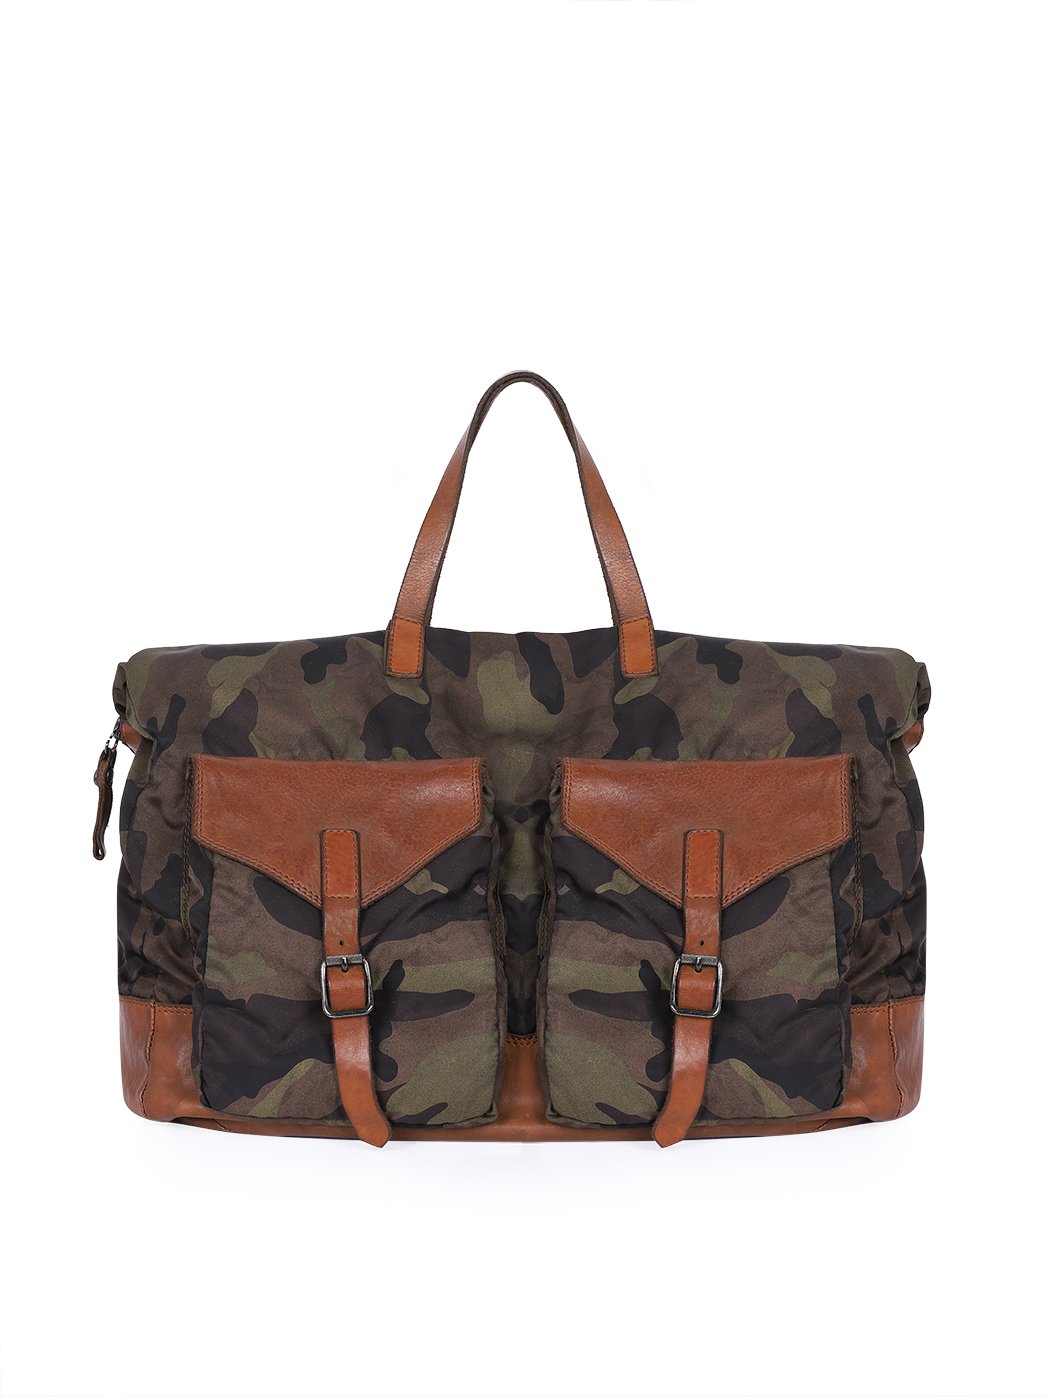 Duffle Bag in Leather and Nylon Camouflage + Military Green